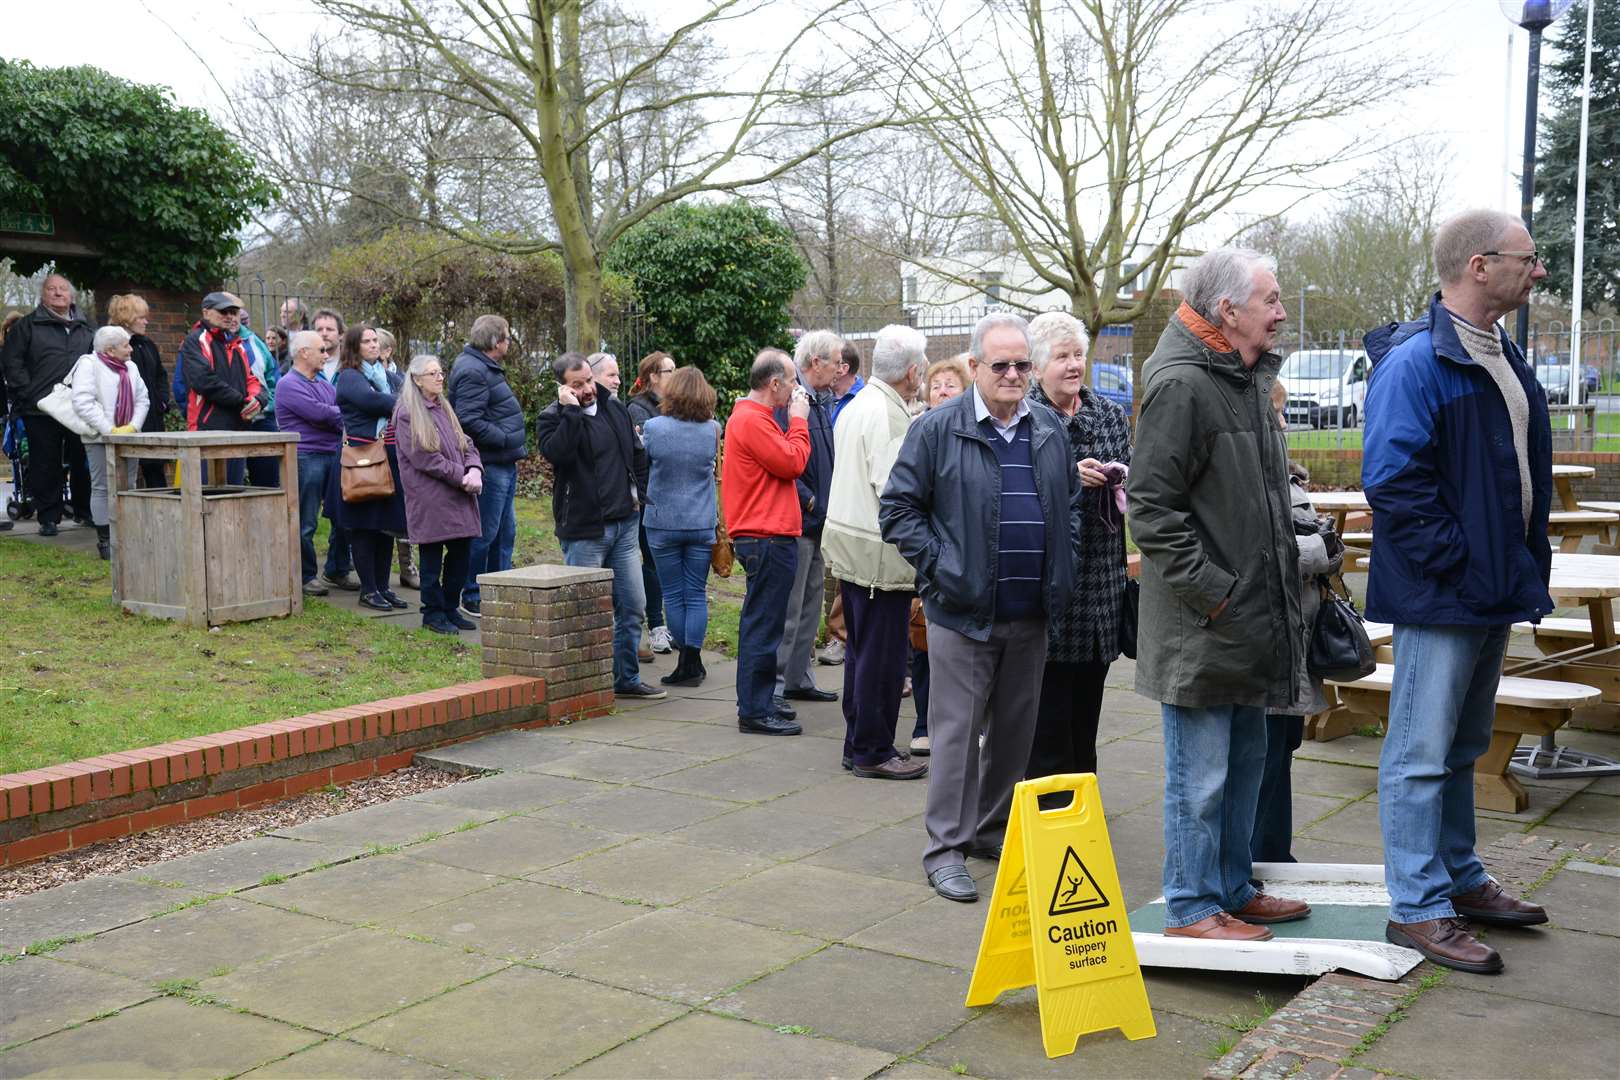 Residents queued to make their concerns heard at meetings and exhibitions